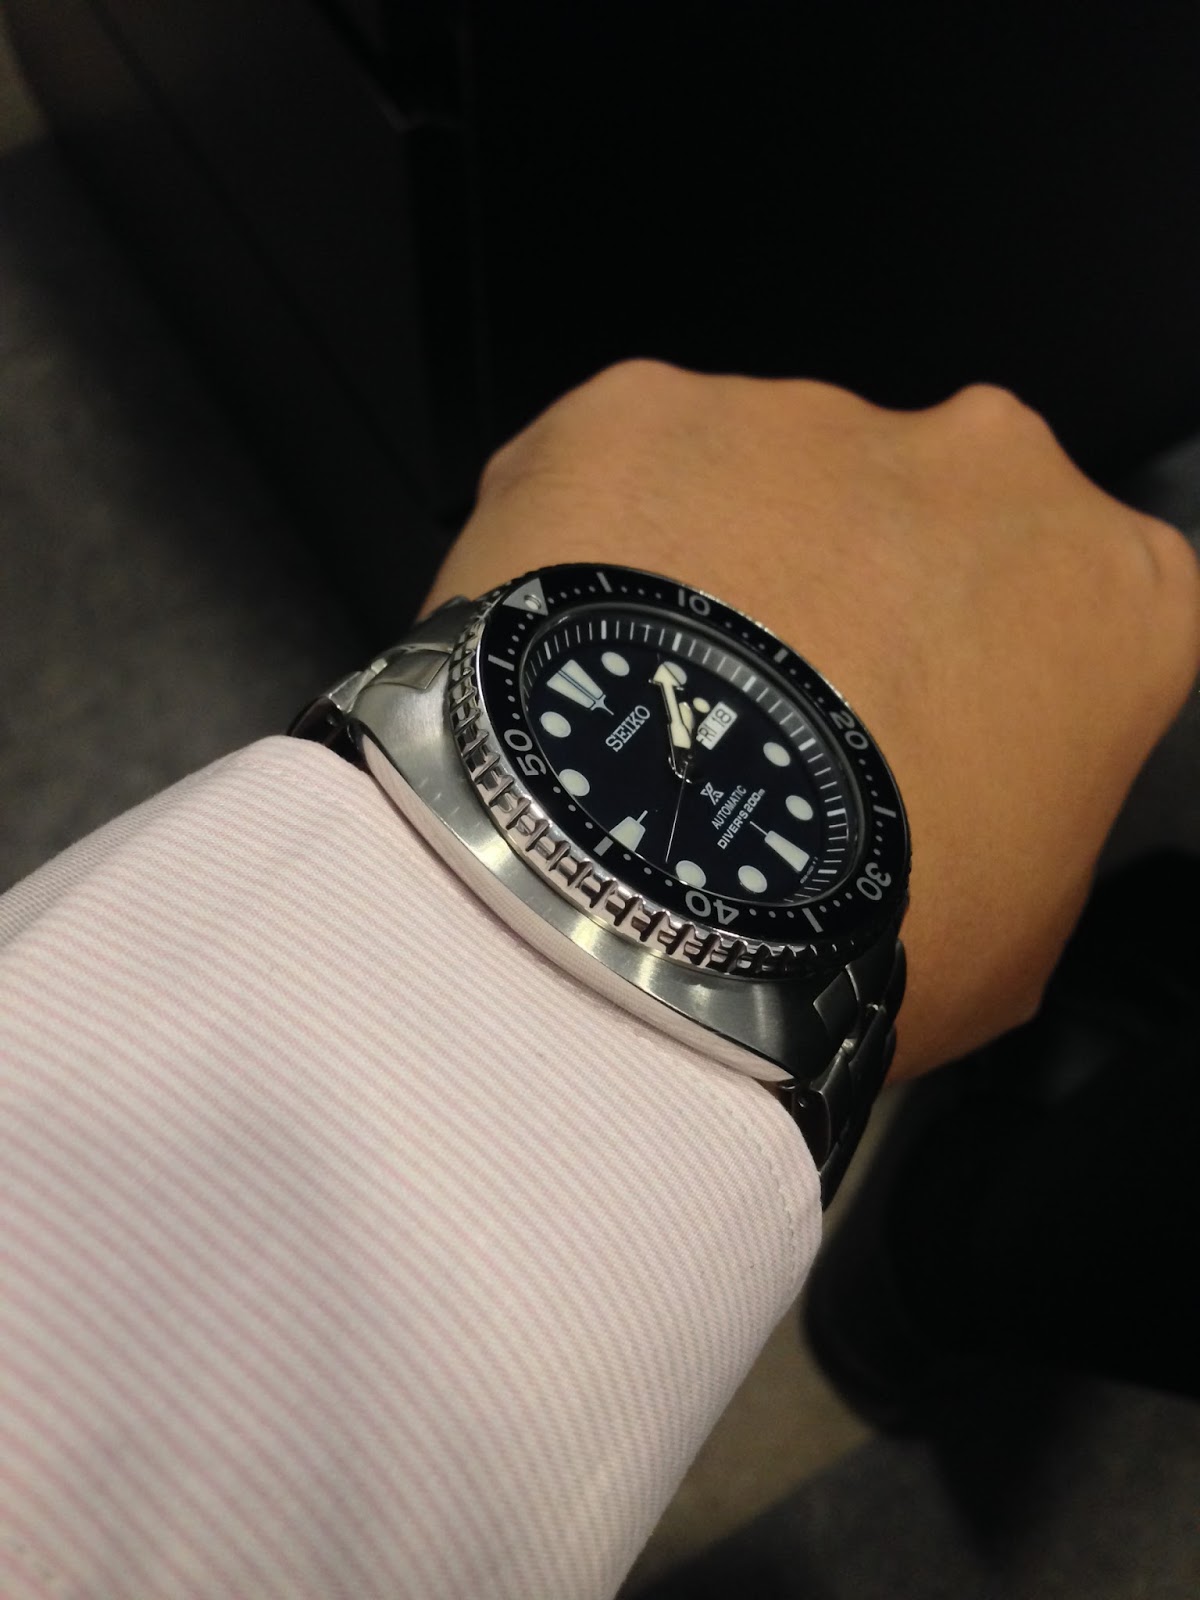 A Fortnight Review: 2 Weeks On The Wrist With The Seiko Prospex SRP773  Turtle Diver Watch